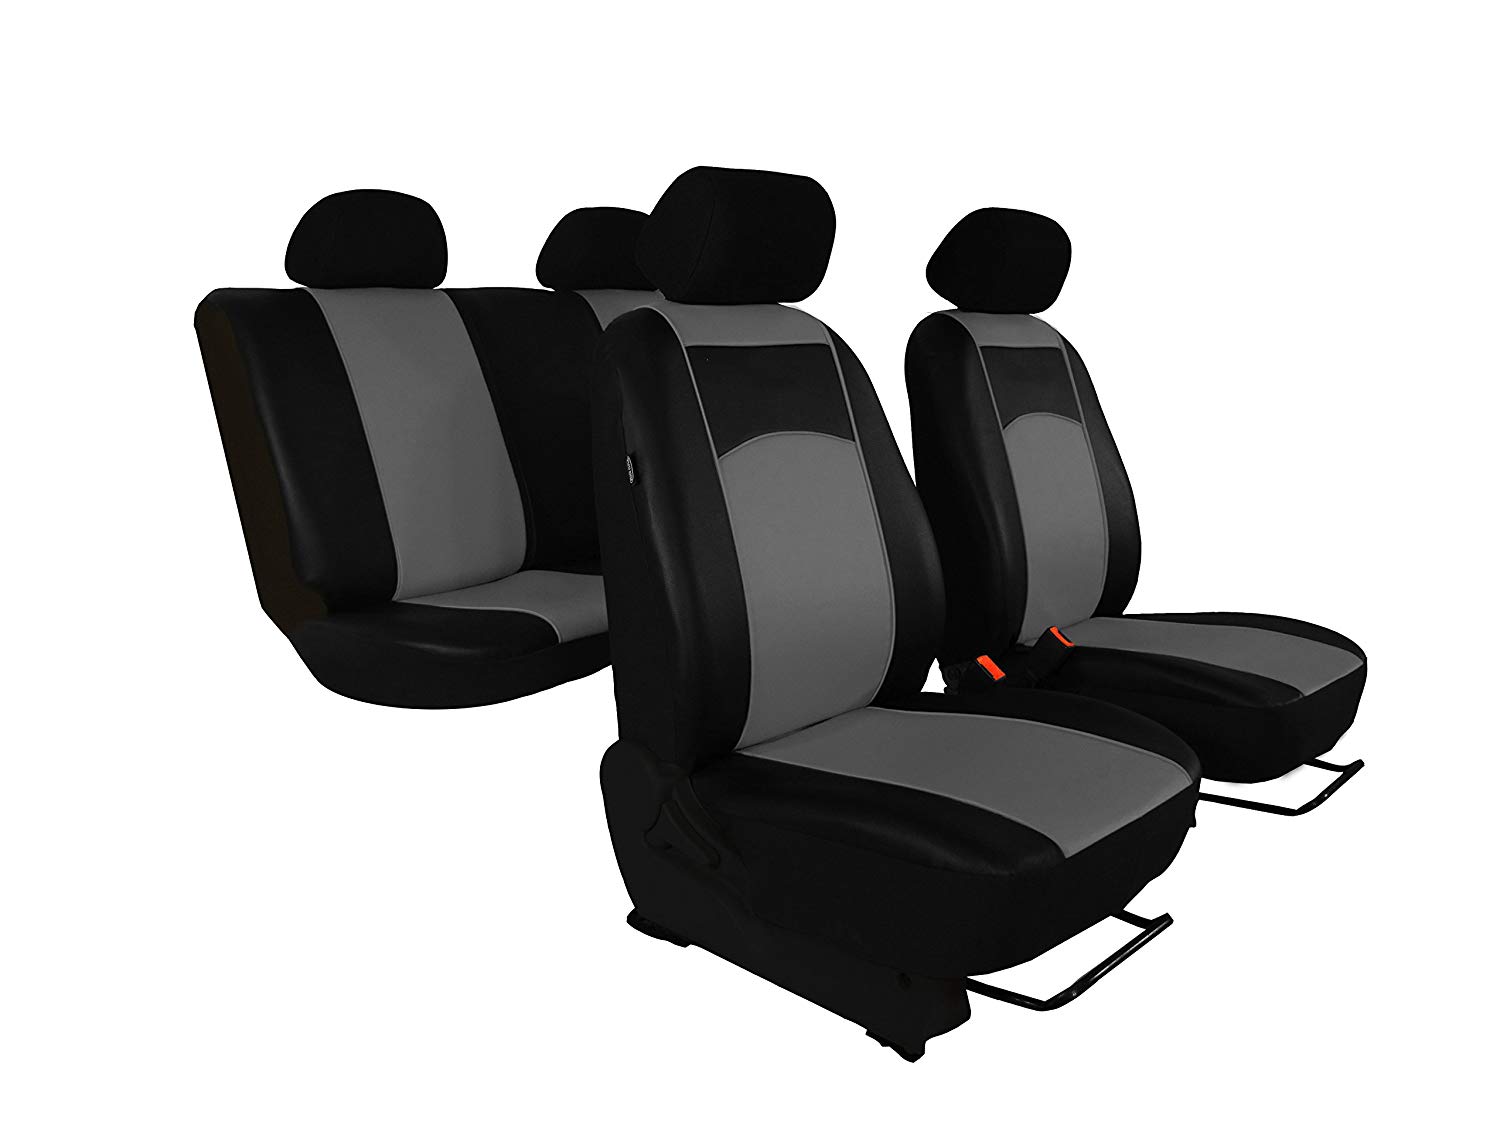 Exclusive Custom Best Quality for VW T4 Transporter 6 seats Covers/Bus Cover Design in Eco Leather Chair in 7 Colours.